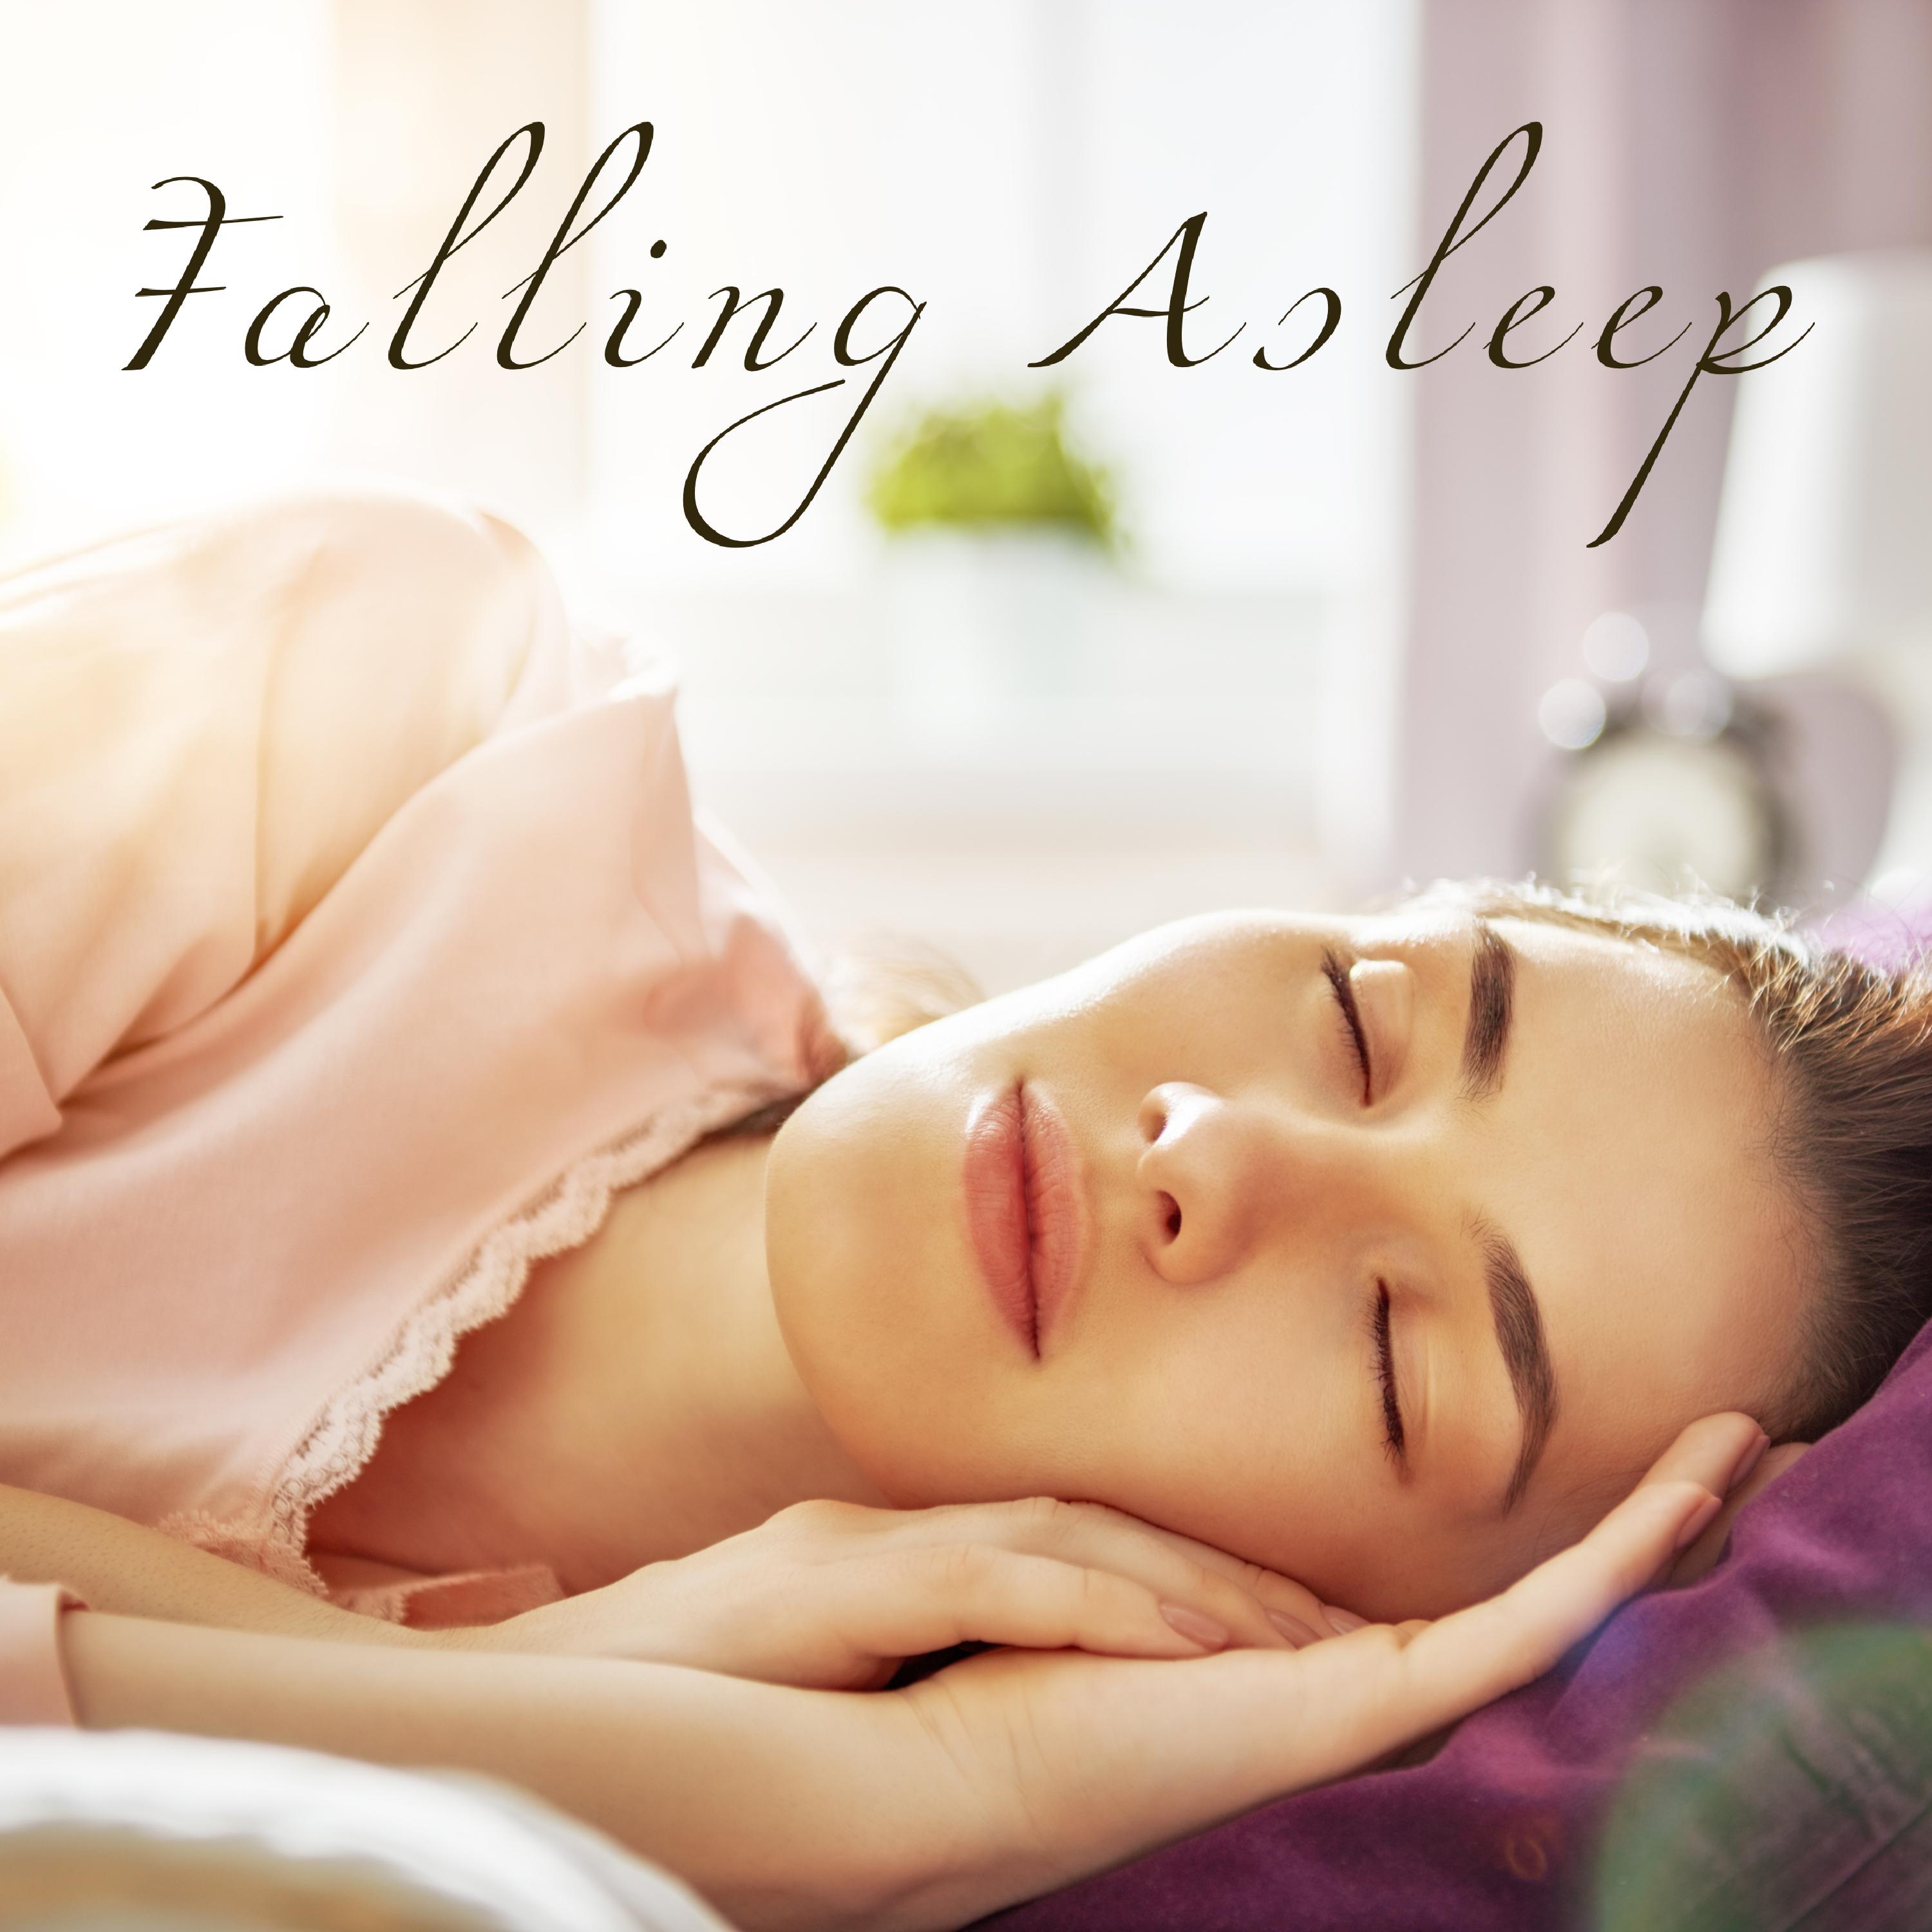 Falling Asleep – Soft Music Background and Gentle Sounds of Nature to Help You Relax and Sleep